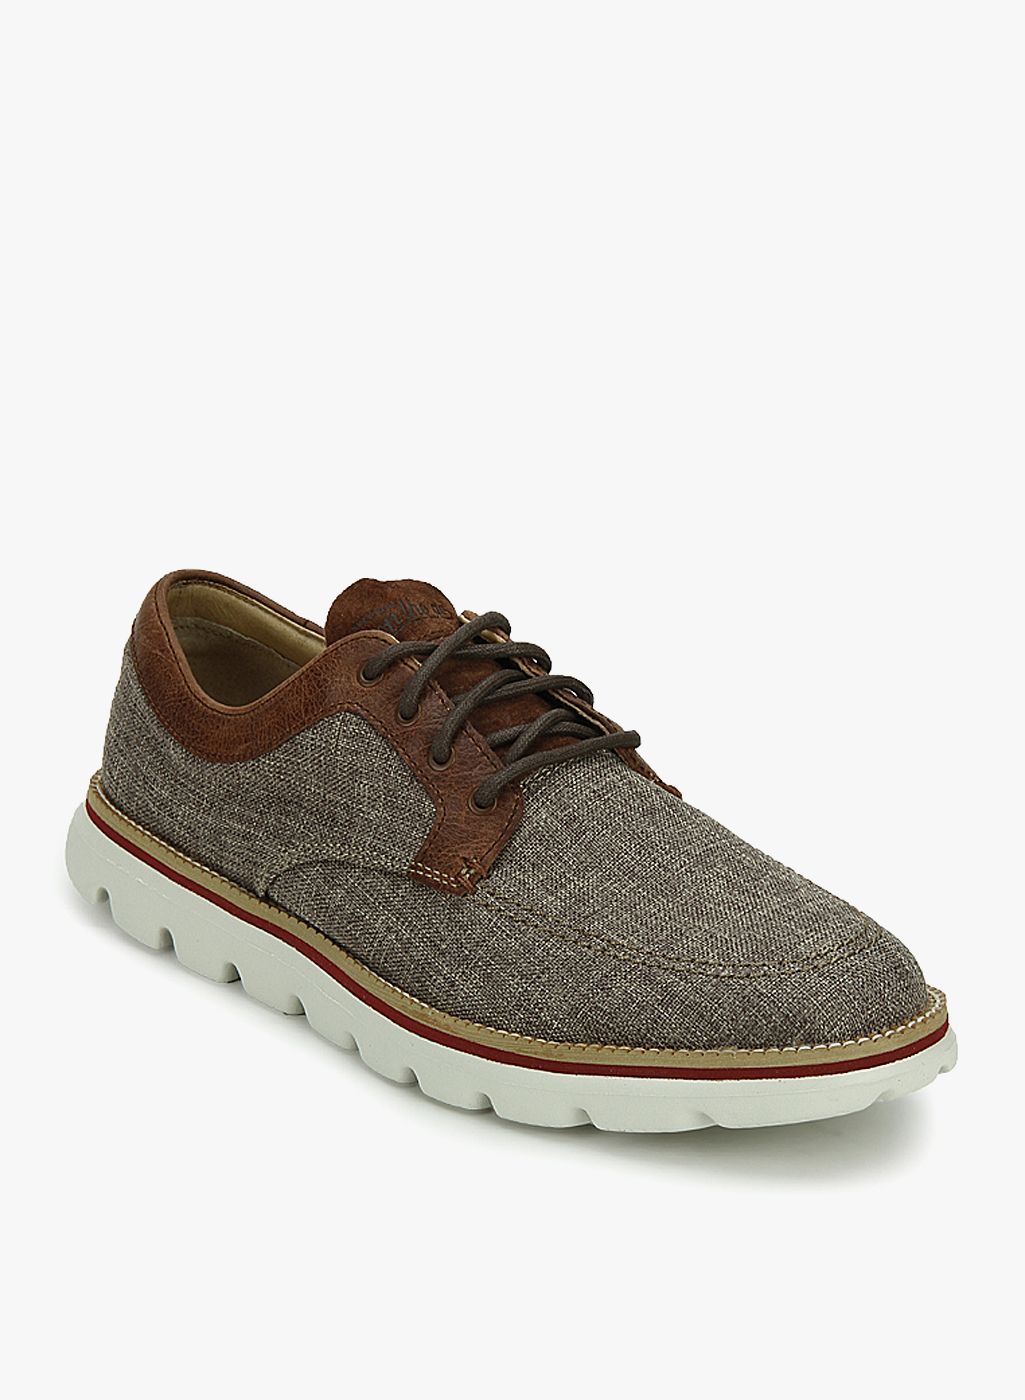 skechers on the go huxley brown sneakers